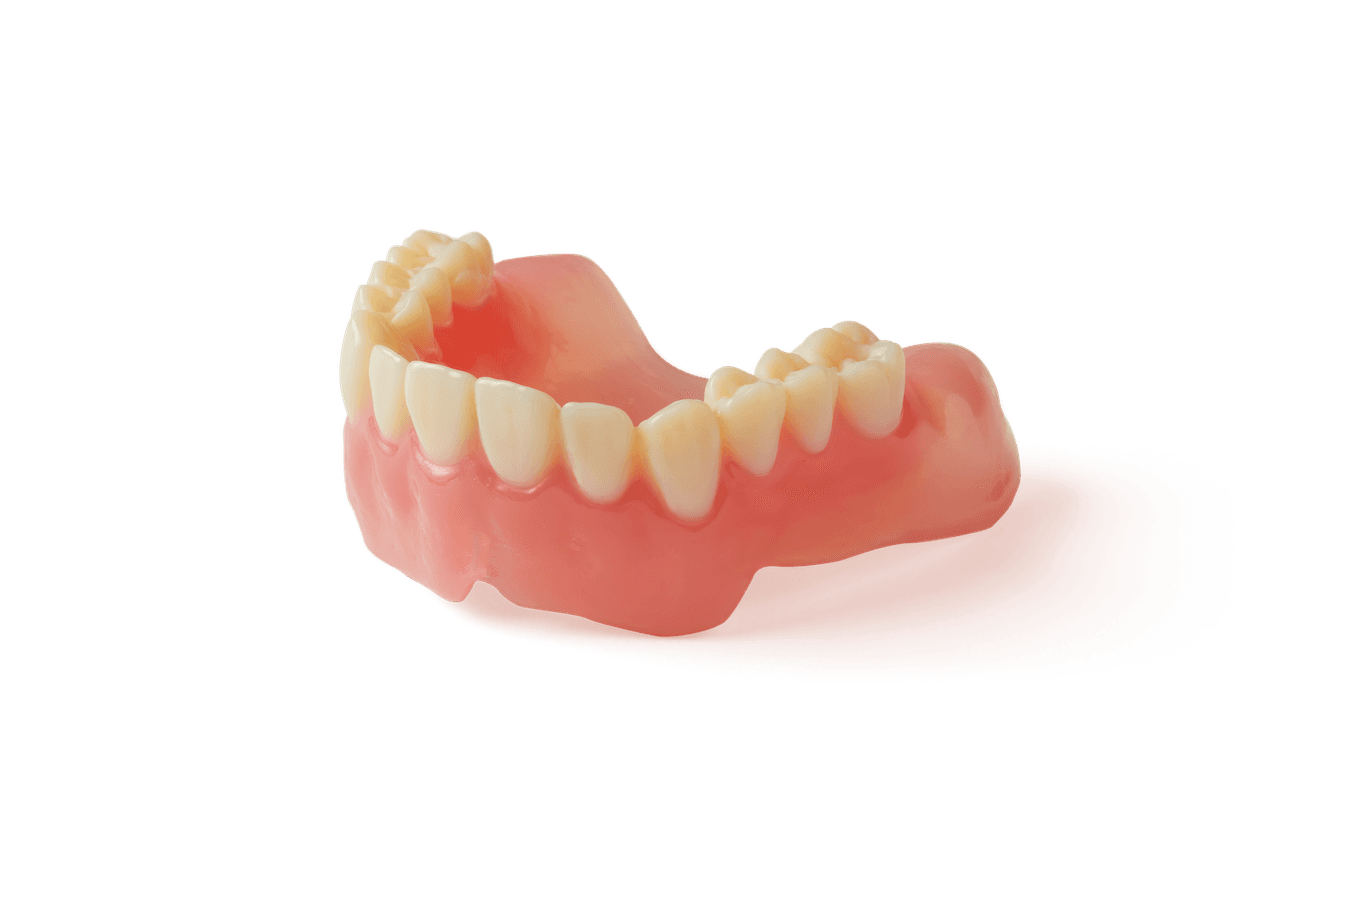 3D printed digital dentures including teeth and base, fully assembled